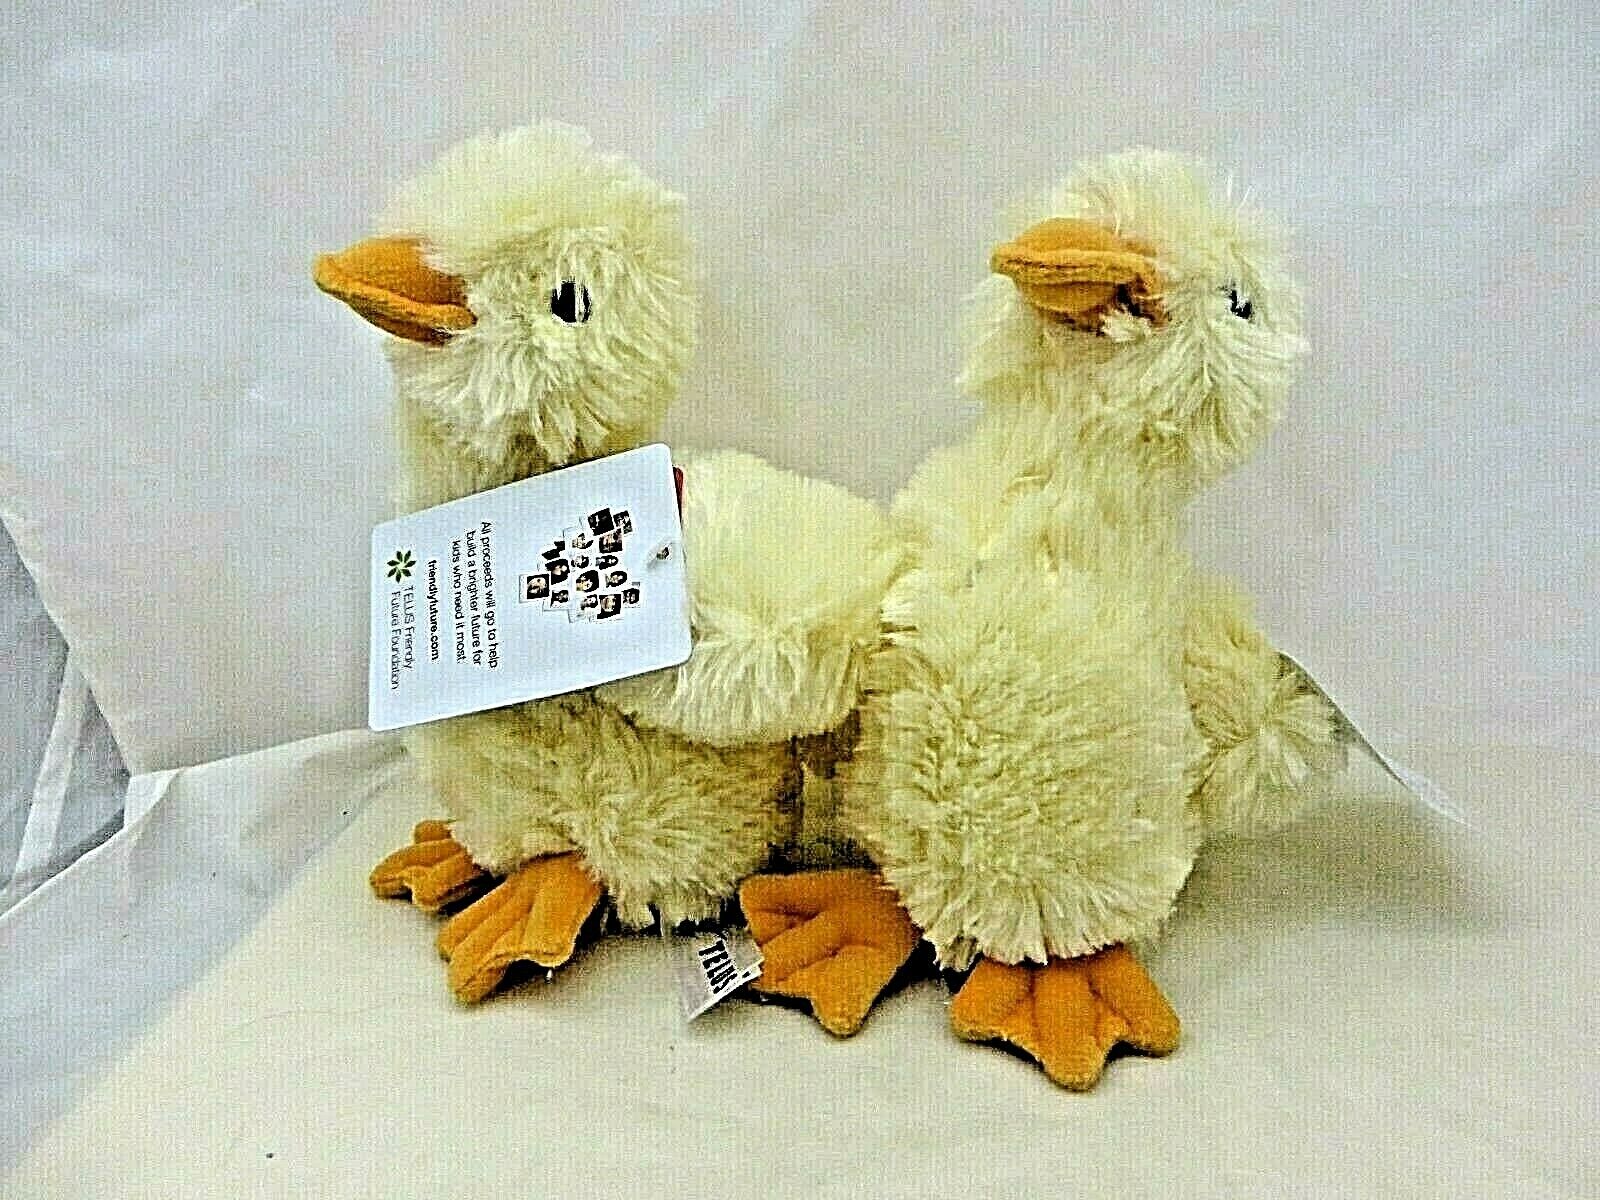 Telus Duckling Plush lot 本物品質の お年玉セール特価 2 Retired inches 7 tall approx